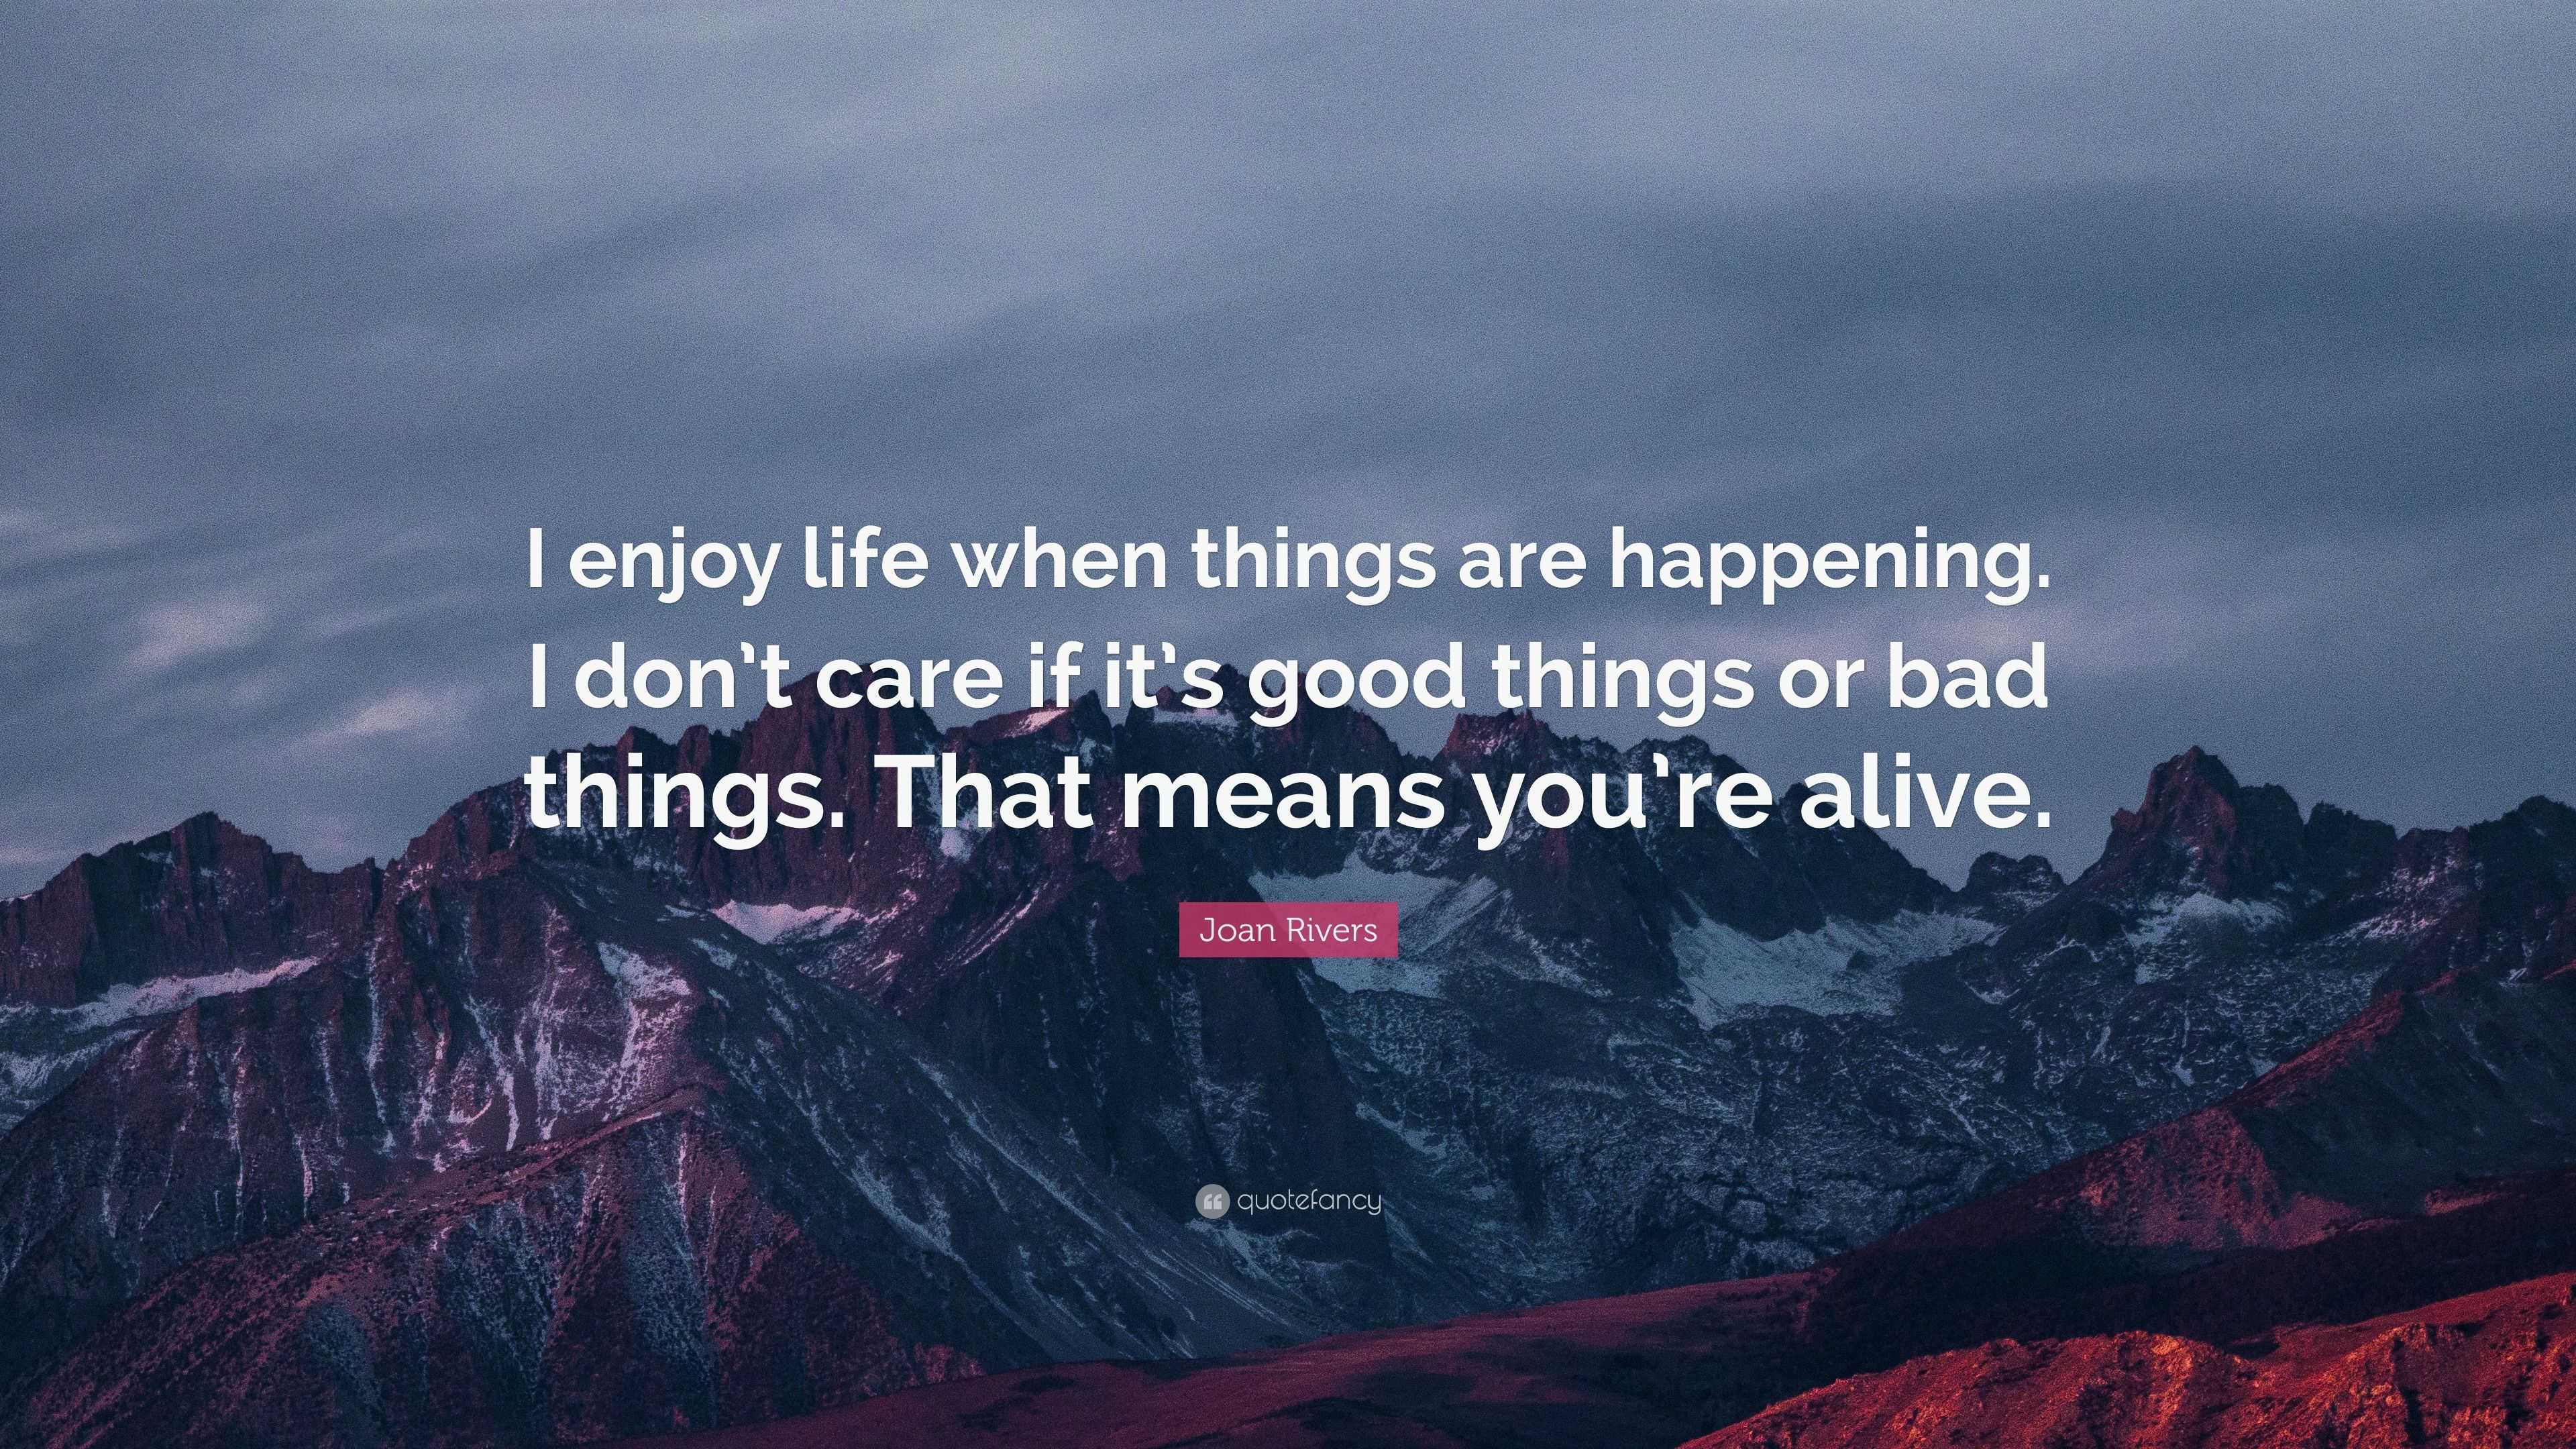 Joan Rivers Quote “I enjoy life when things are happening I don